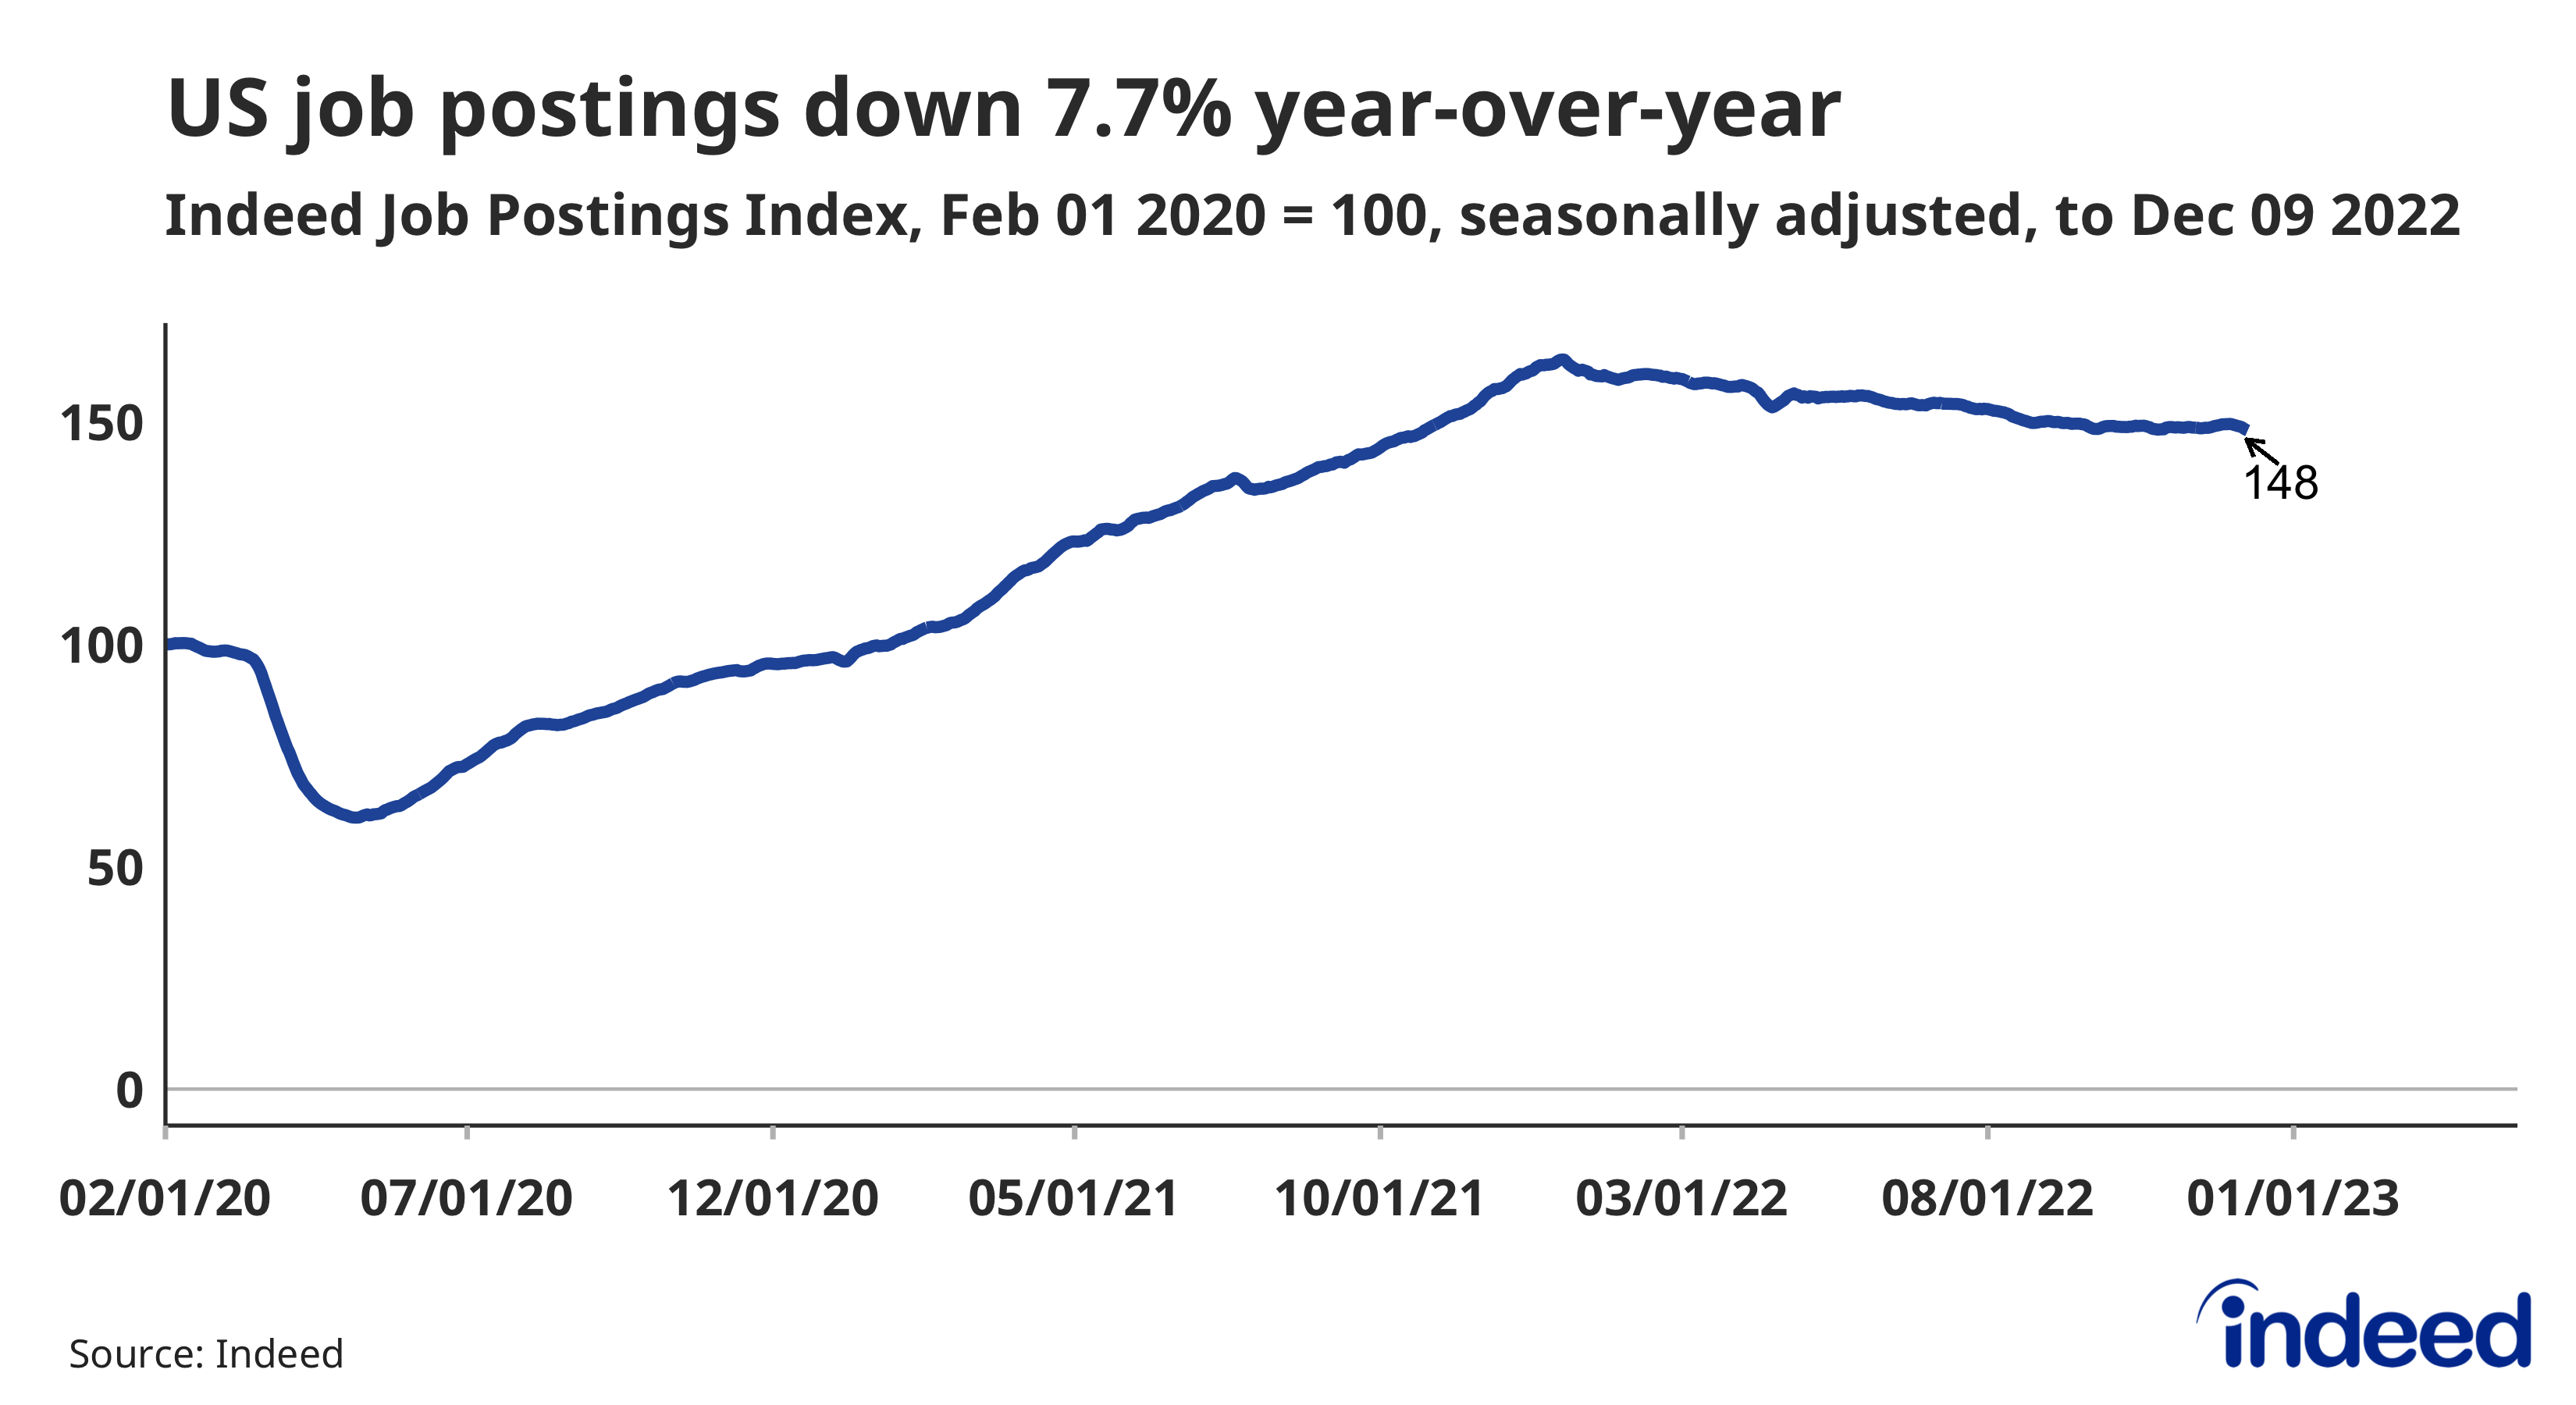 Line graph titled “US job postings down 7.7% year-over-year” with a vertical axis from 0 to 200. The graph covers from February 1, 2020 to Dec 9th, 2020 and displays the Indeed Job Postings Index. The index fell dramatically in spring 2020 before rebounding strongly in 2021 and then trending down for most of 2022.